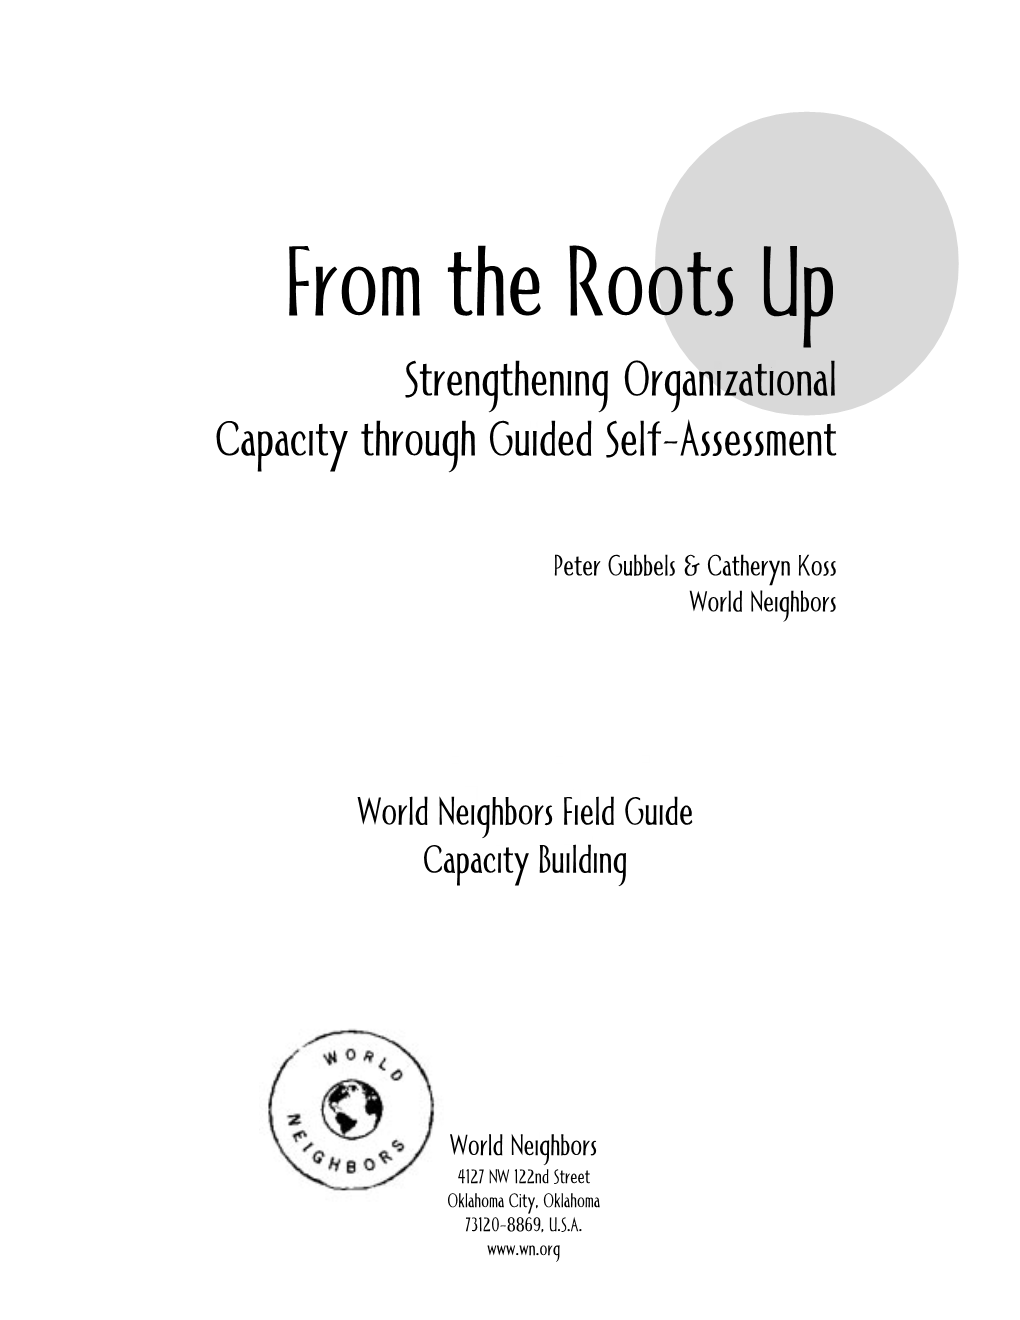 From the Roots up Strengthening Organizational Capacity Through Guided Self-Assessment